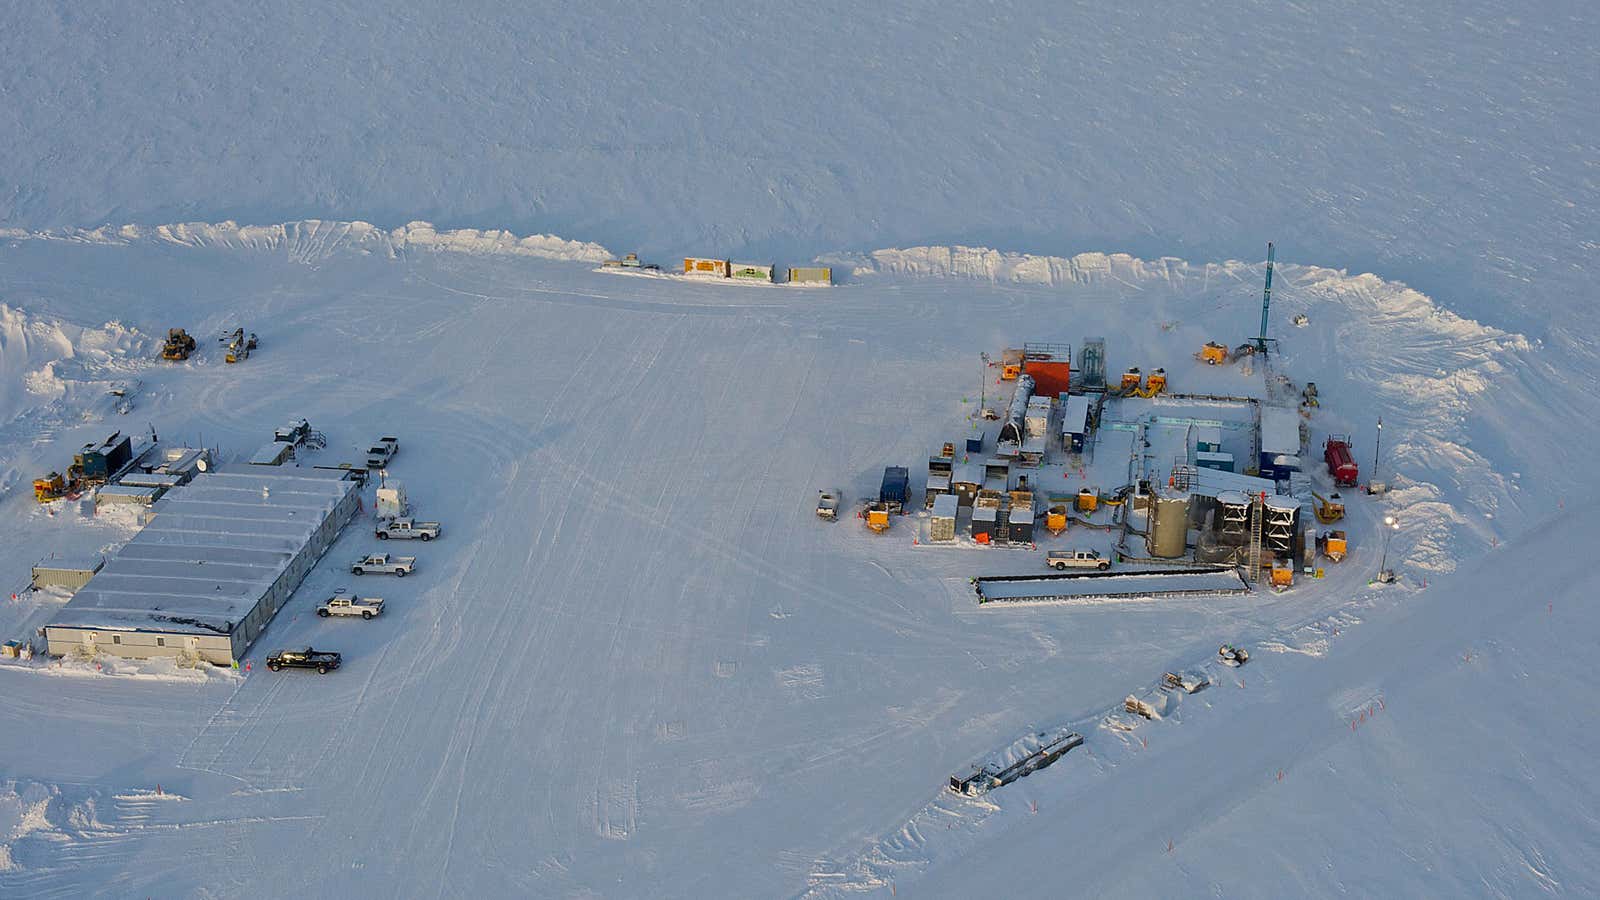 At this experimental rig in the arctic, ConocoPhillips is working to extract natural gas from ice.